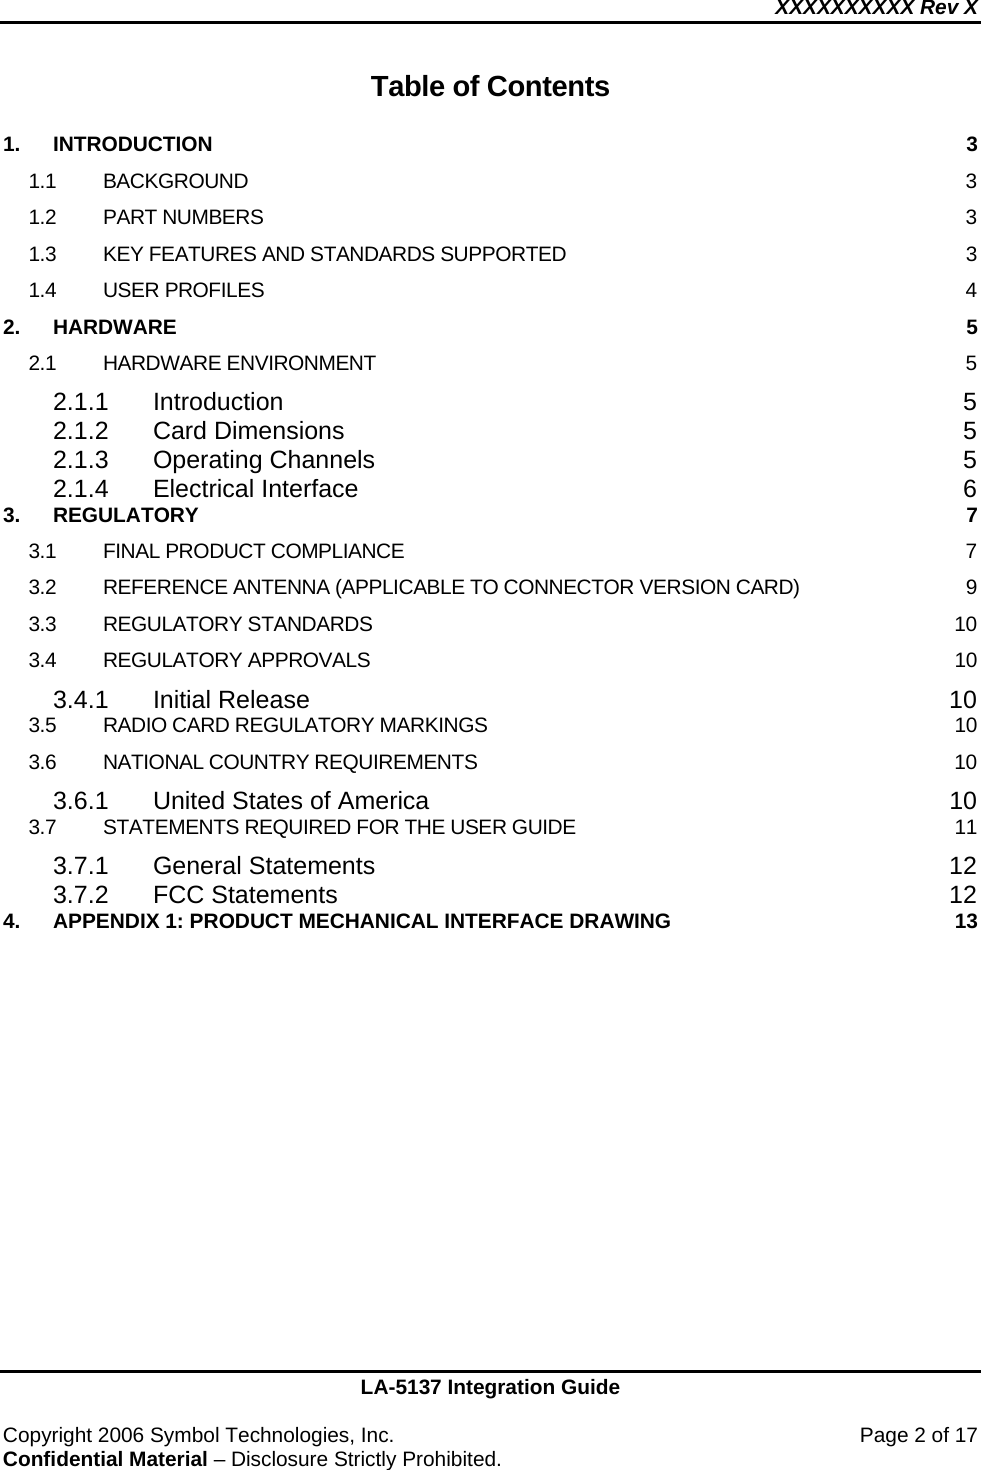 XXXXXXXXXX Rev X    LA-5137 Integration Guide  Copyright 2006 Symbol Technologies, Inc.    Page 2 of 17 Confidential Material – Disclosure Strictly Prohibited.  Table of Contents  1. INTRODUCTION  3 1.1 BACKGROUND  3 1.2 PART NUMBERS  3 1.3 KEY FEATURES AND STANDARDS SUPPORTED  3 1.4 USER PROFILES  4 2. HARDWARE  5 2.1 HARDWARE ENVIRONMENT  5 2.1.1 Introduction 5 2.1.2 Card Dimensions  5 2.1.3 Operating Channels  5 2.1.4 Electrical Interface  6 3. REGULATORY  7 3.1 FINAL PRODUCT COMPLIANCE  7 3.2 REFERENCE ANTENNA (APPLICABLE TO CONNECTOR VERSION CARD)  9 3.3 REGULATORY STANDARDS  10 3.4 REGULATORY APPROVALS  10 3.4.1 Initial Release  10 3.5 RADIO CARD REGULATORY MARKINGS  10 3.6 NATIONAL COUNTRY REQUIREMENTS  10 3.6.1 United States of America  10 3.7 STATEMENTS REQUIRED FOR THE USER GUIDE  11 3.7.1 General Statements  12 3.7.2 FCC Statements  12 4. APPENDIX 1: PRODUCT MECHANICAL INTERFACE DRAWING  13 